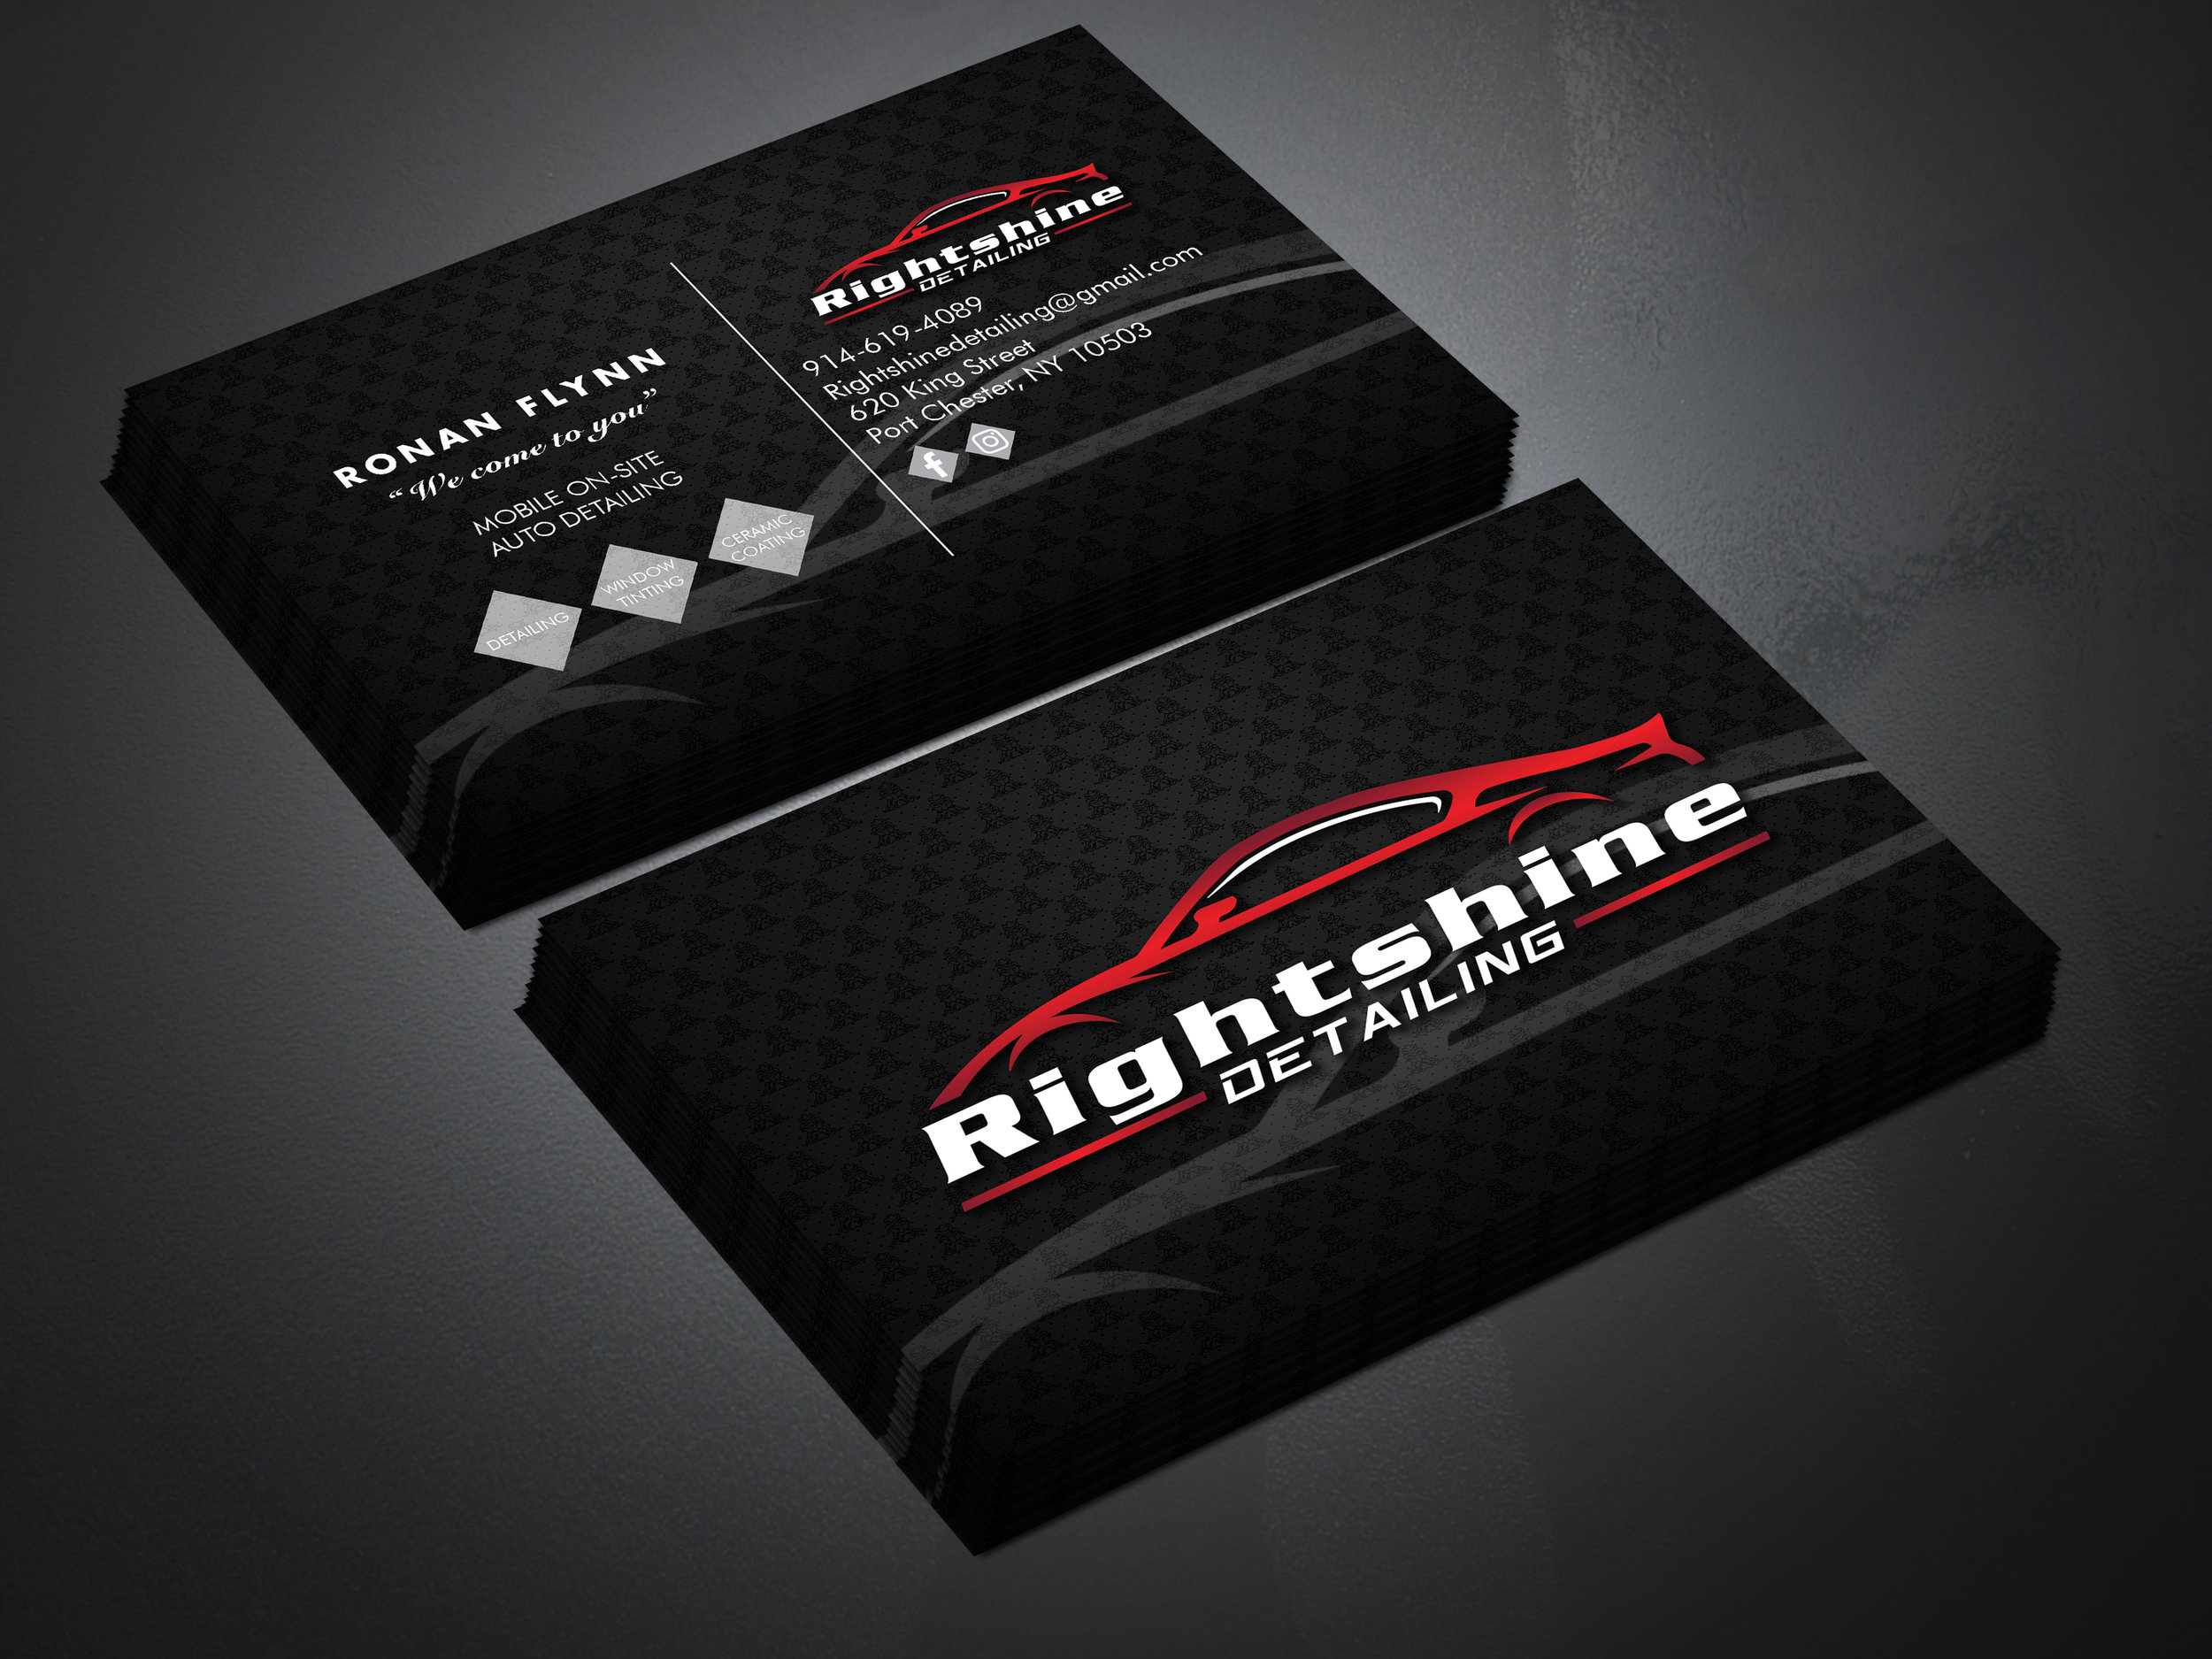 Rightshine Business Card Design Port Chester, NY.jpg